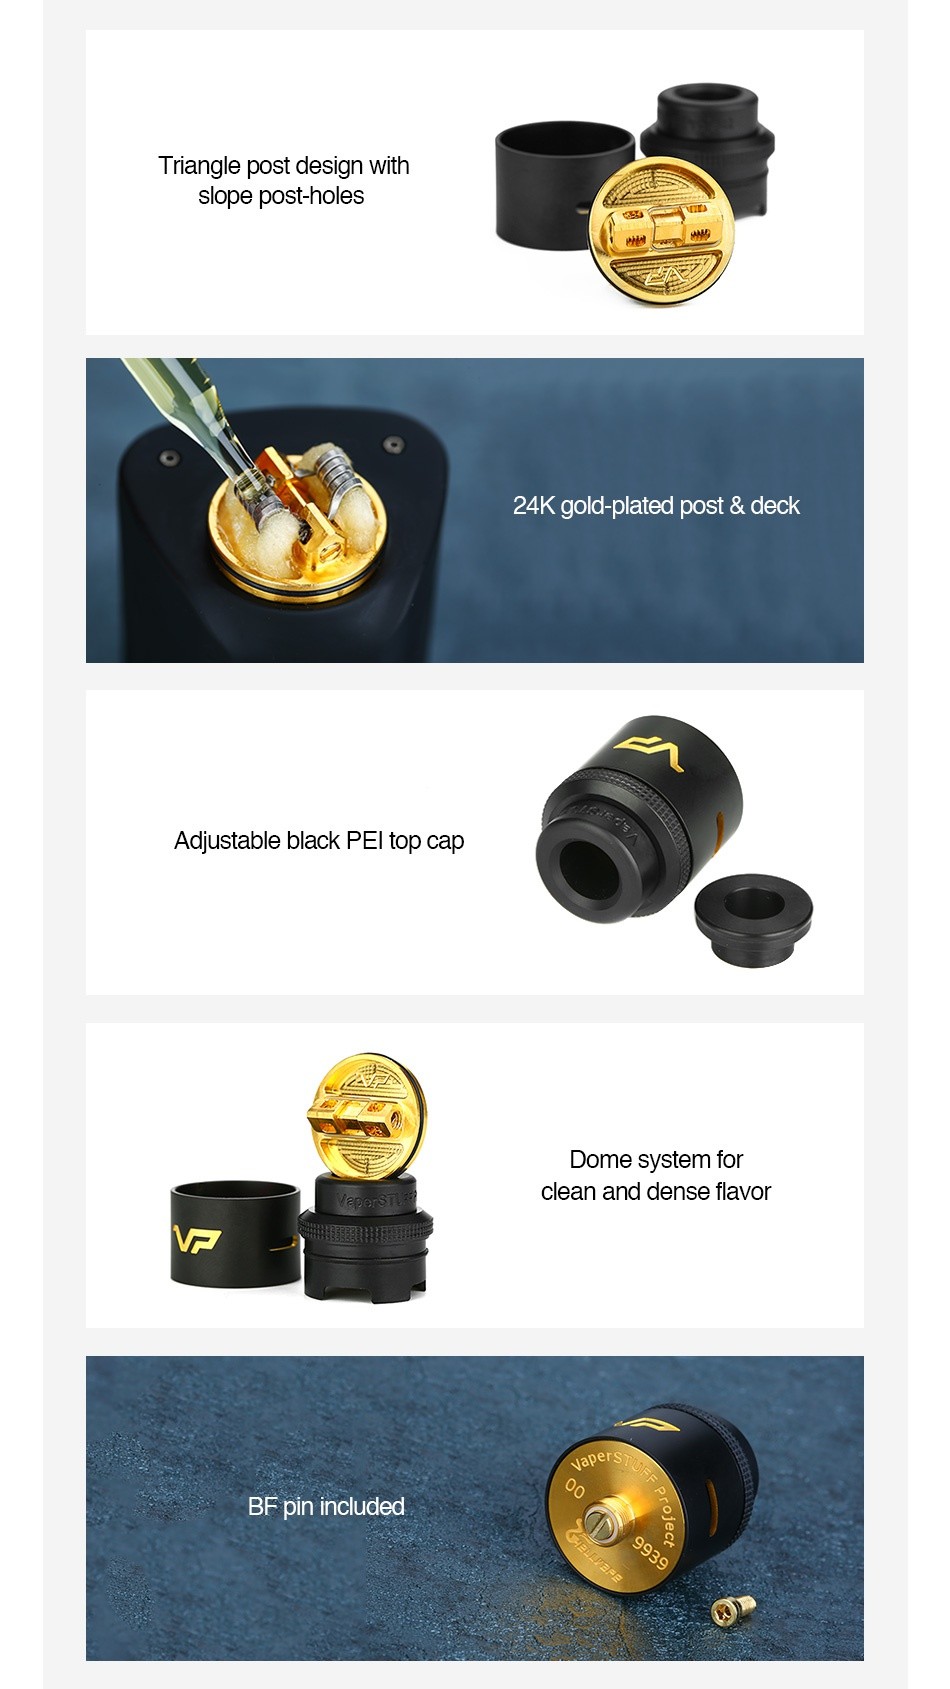 Hellvape VP RDA by VaperSTUFF Indonesia Triangle post design with slope post holes 24K gold plated post deck Adjustable black PEl top cap Dome system for clean and dense flavor Papers BF pin included